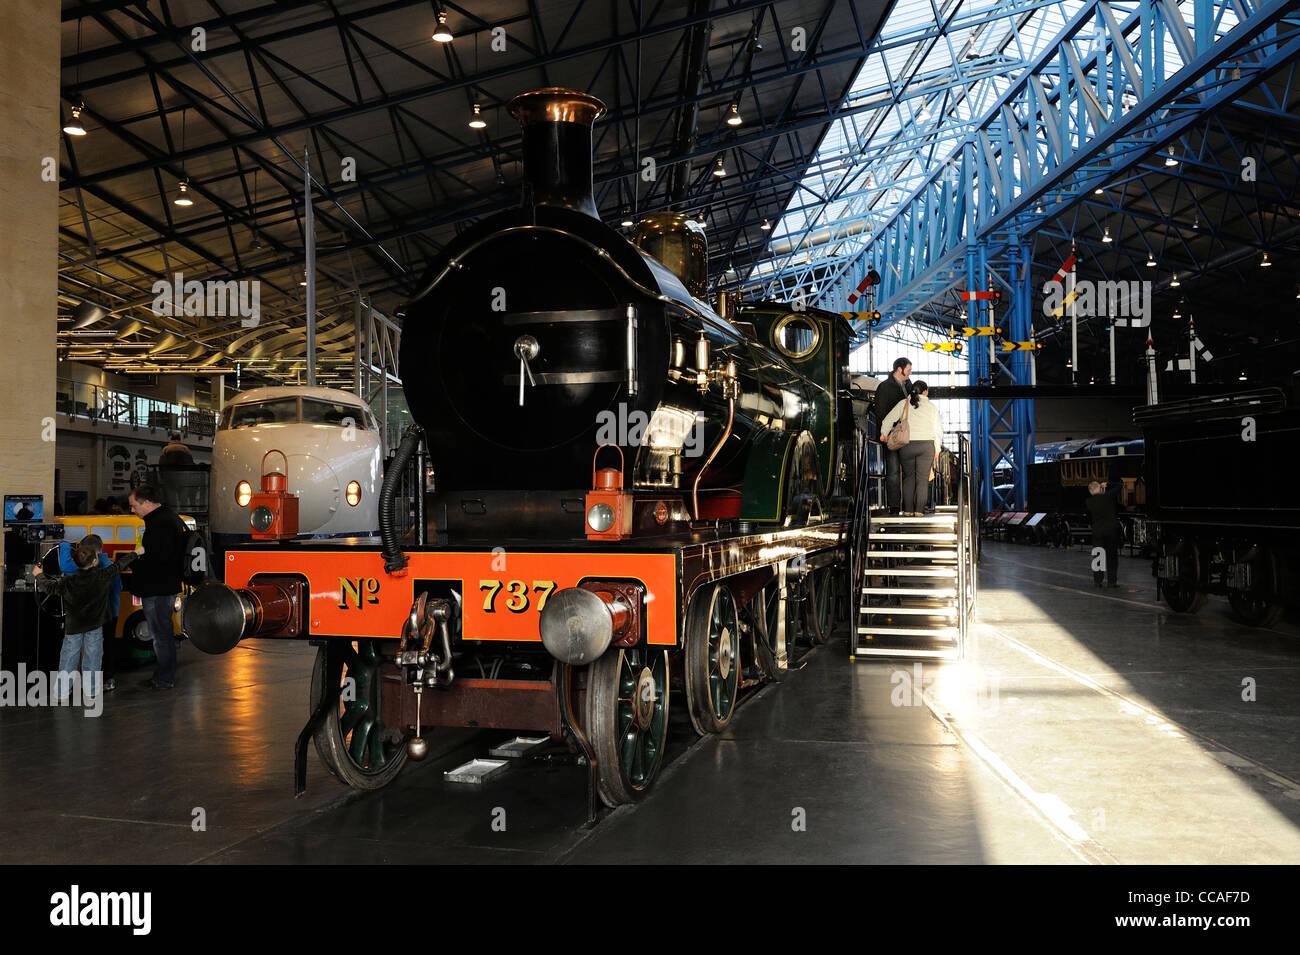 South Eastern & Chatham Railway Class D 4-4-0 steam locomotive No 737,on display in the national railway museum york uk Stock Photo